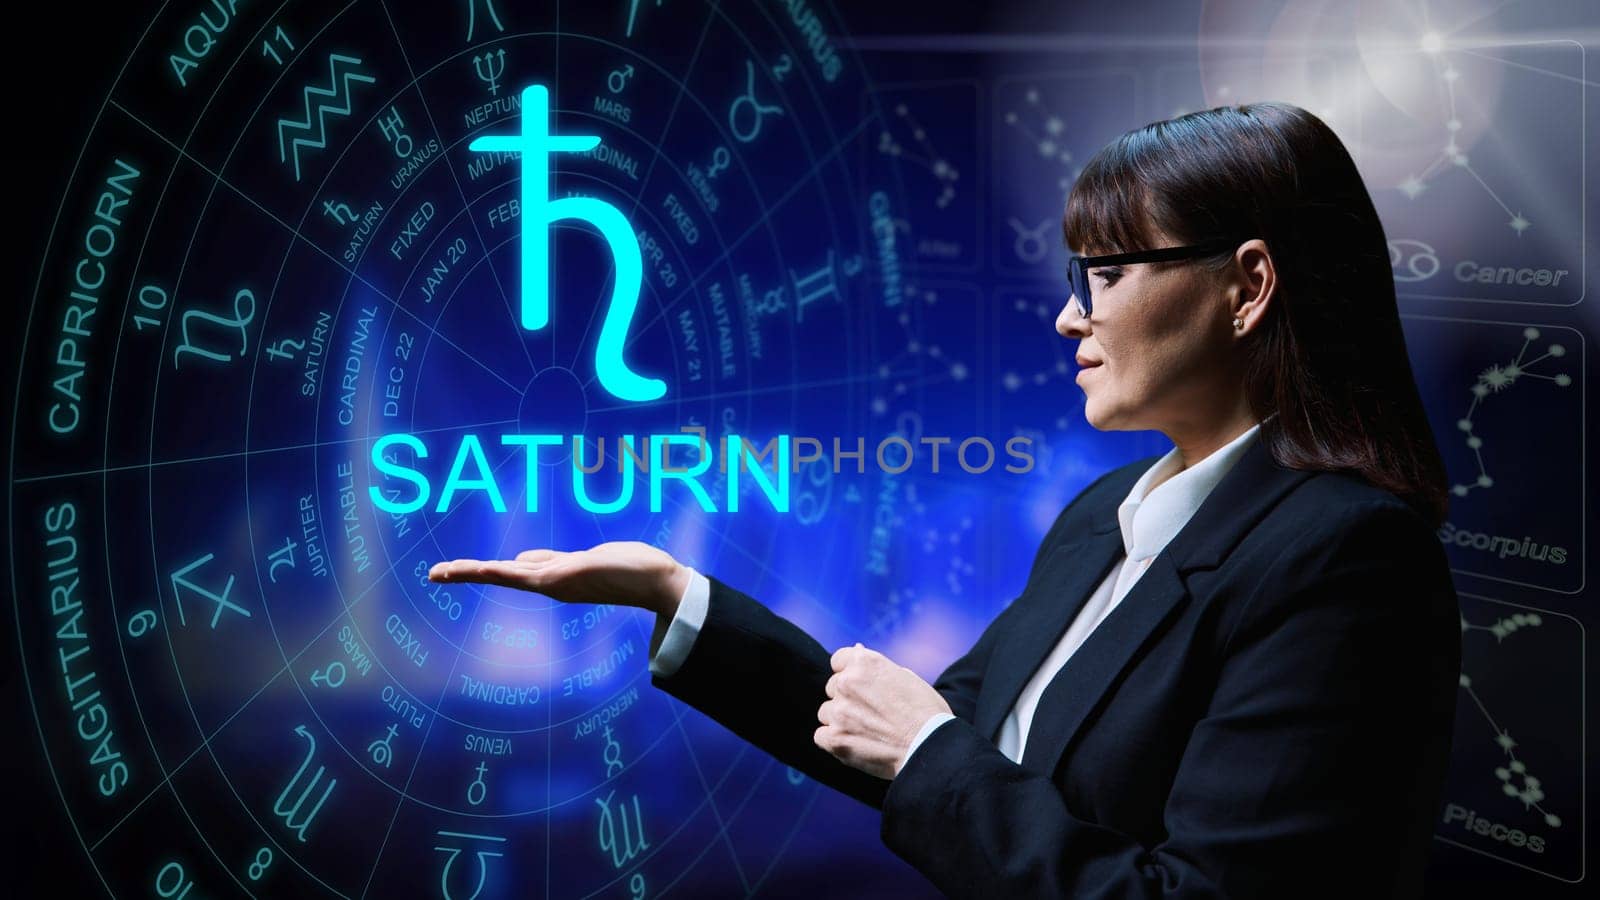 Astrological forecast, meaning, influence of planet Saturn. Serious woman on starry background showing Saturn sign symbol. Future forecast, astrology, horoscope, advice, universe, exoteric concept